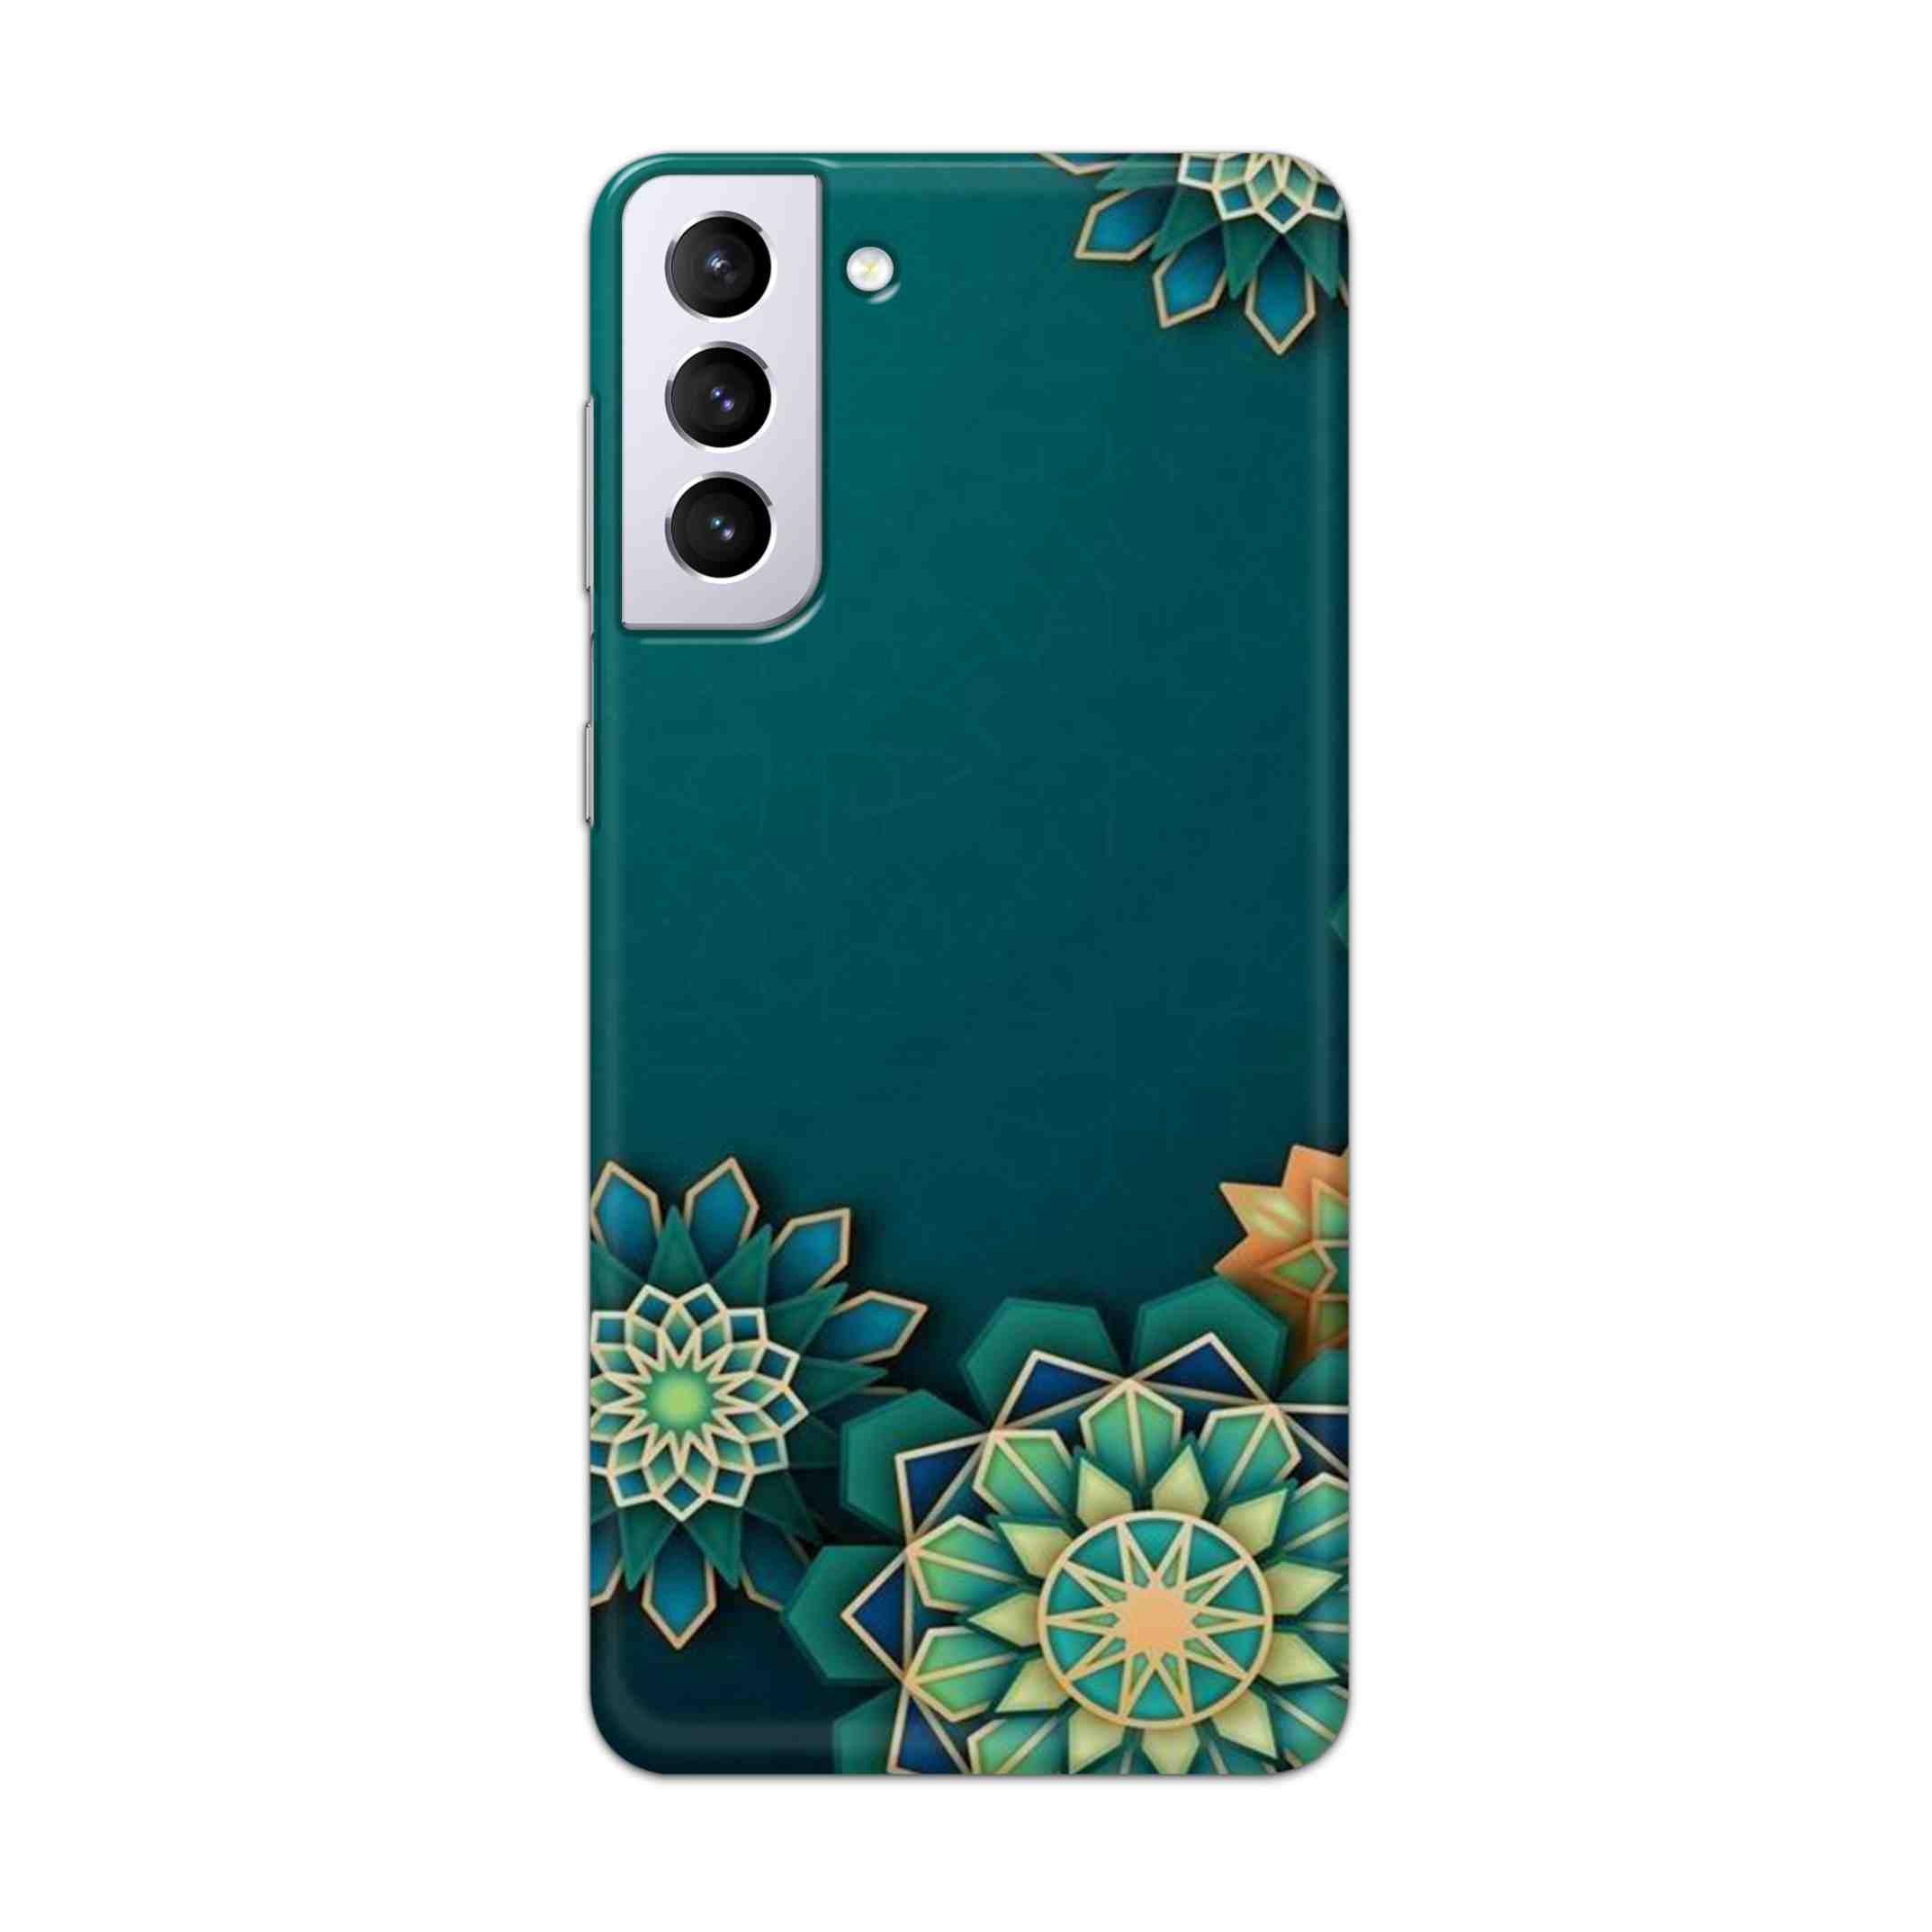 Buy Green Flower Hard Back Mobile Phone Case Cover For Samsung Galaxy S21 Plus Online